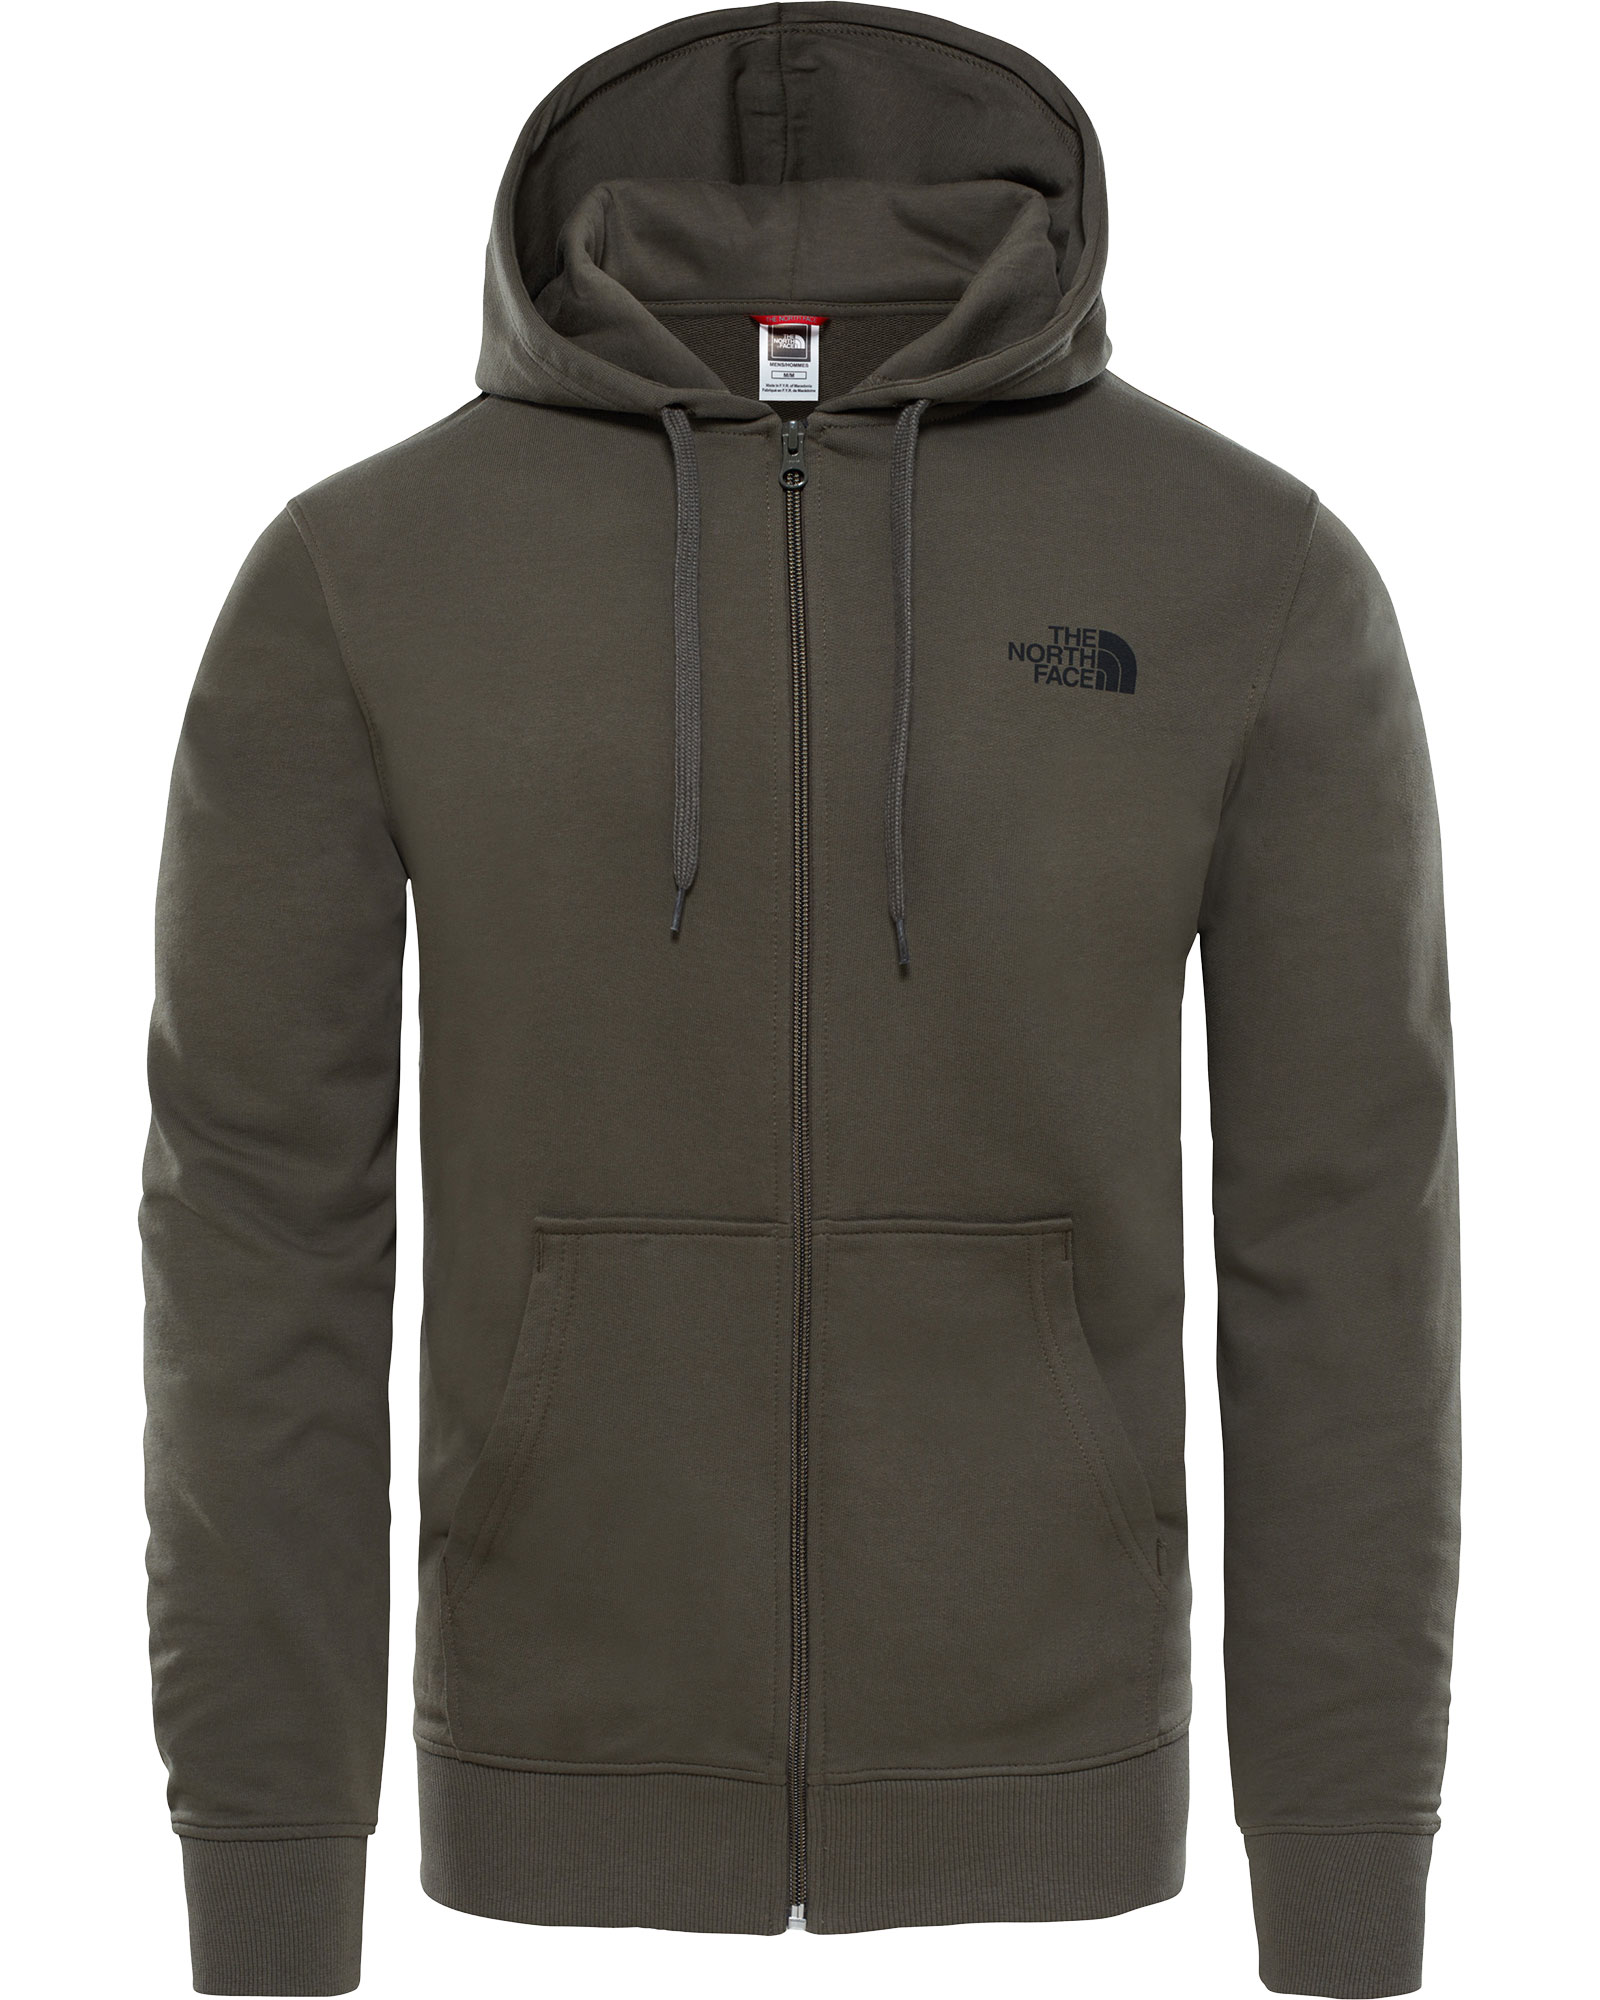 The North Face Open Gate Men’s Full Zip Hoodie - New Taupe Green XL